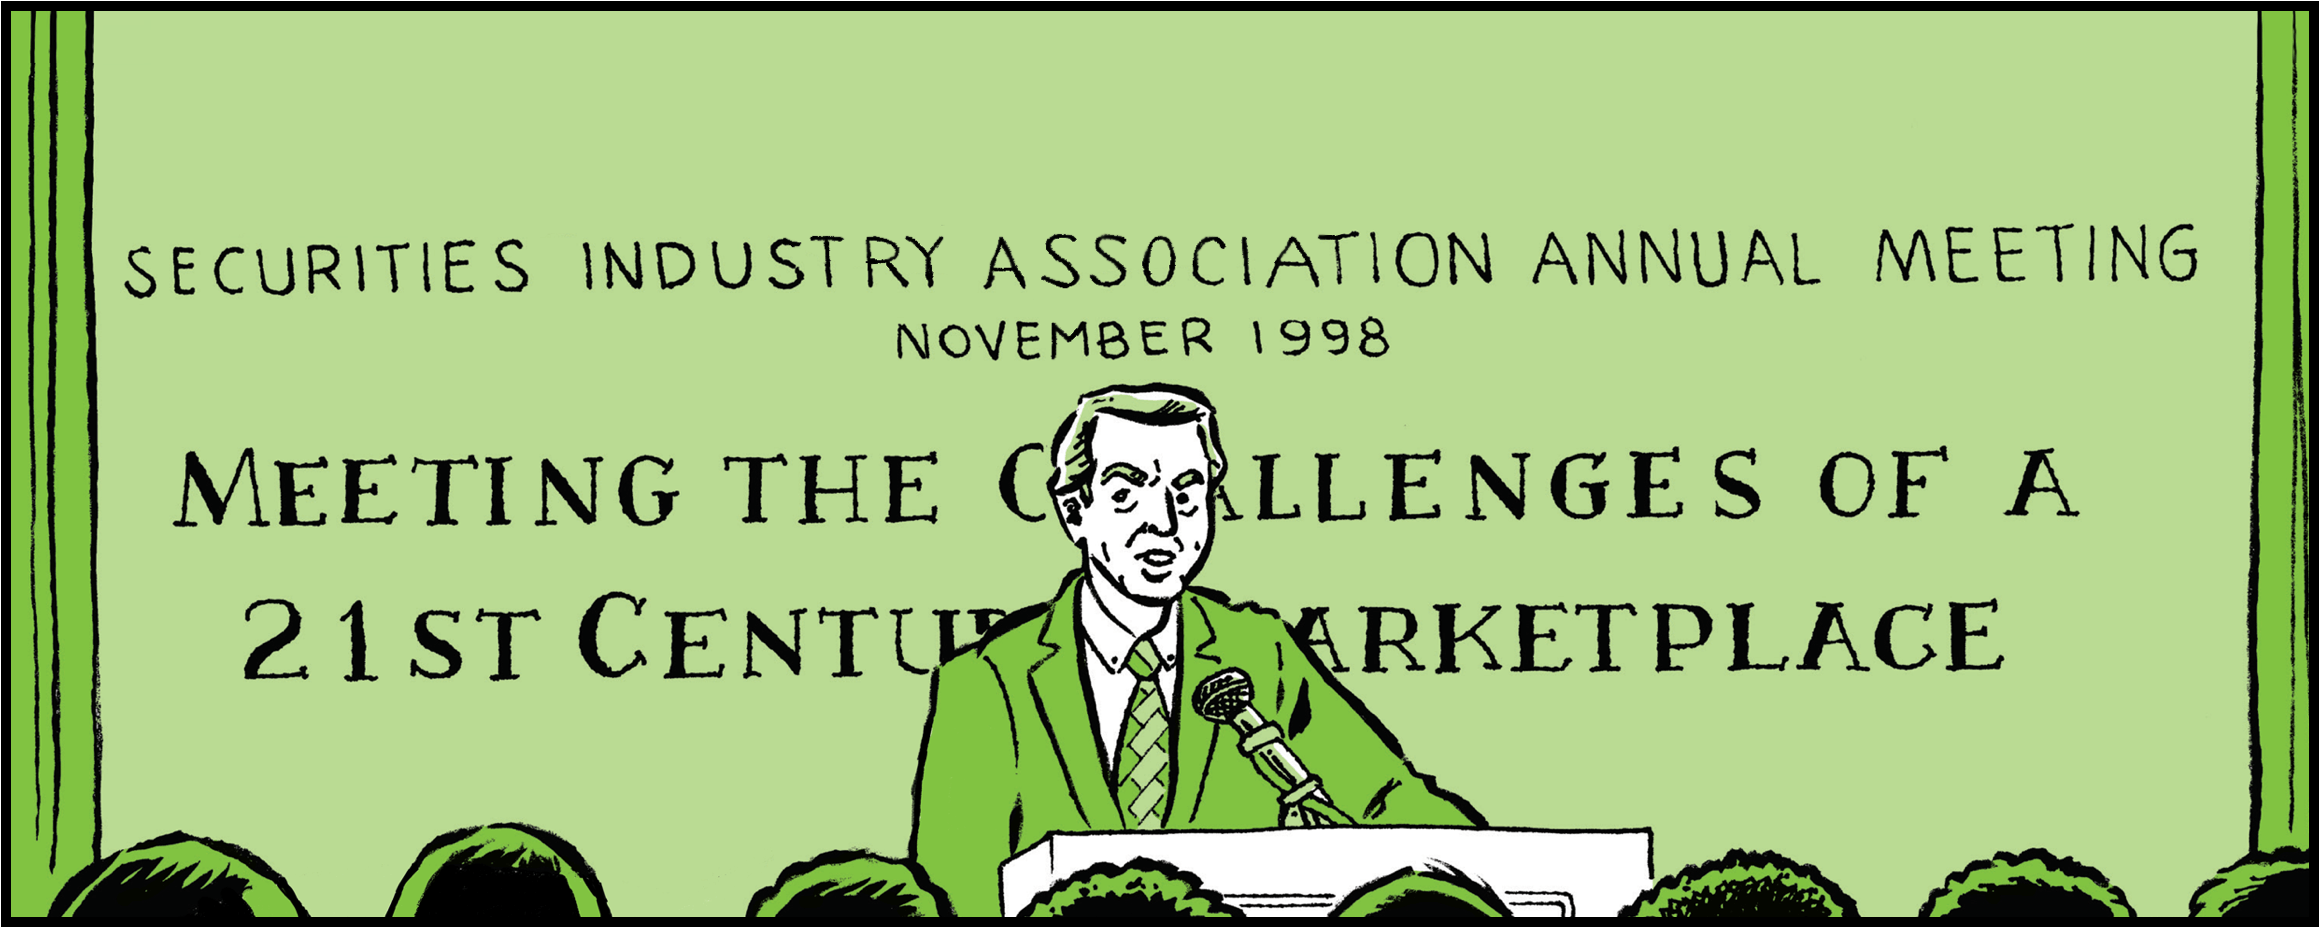 SEC Chairman Arthur Levitt speaking to the 1998 Securities Industry Association Annual Meeting: How do we ensure that advances in technology do not outpace our ability to protect investors? How does the industry use technology to meet the best interests of its clients?